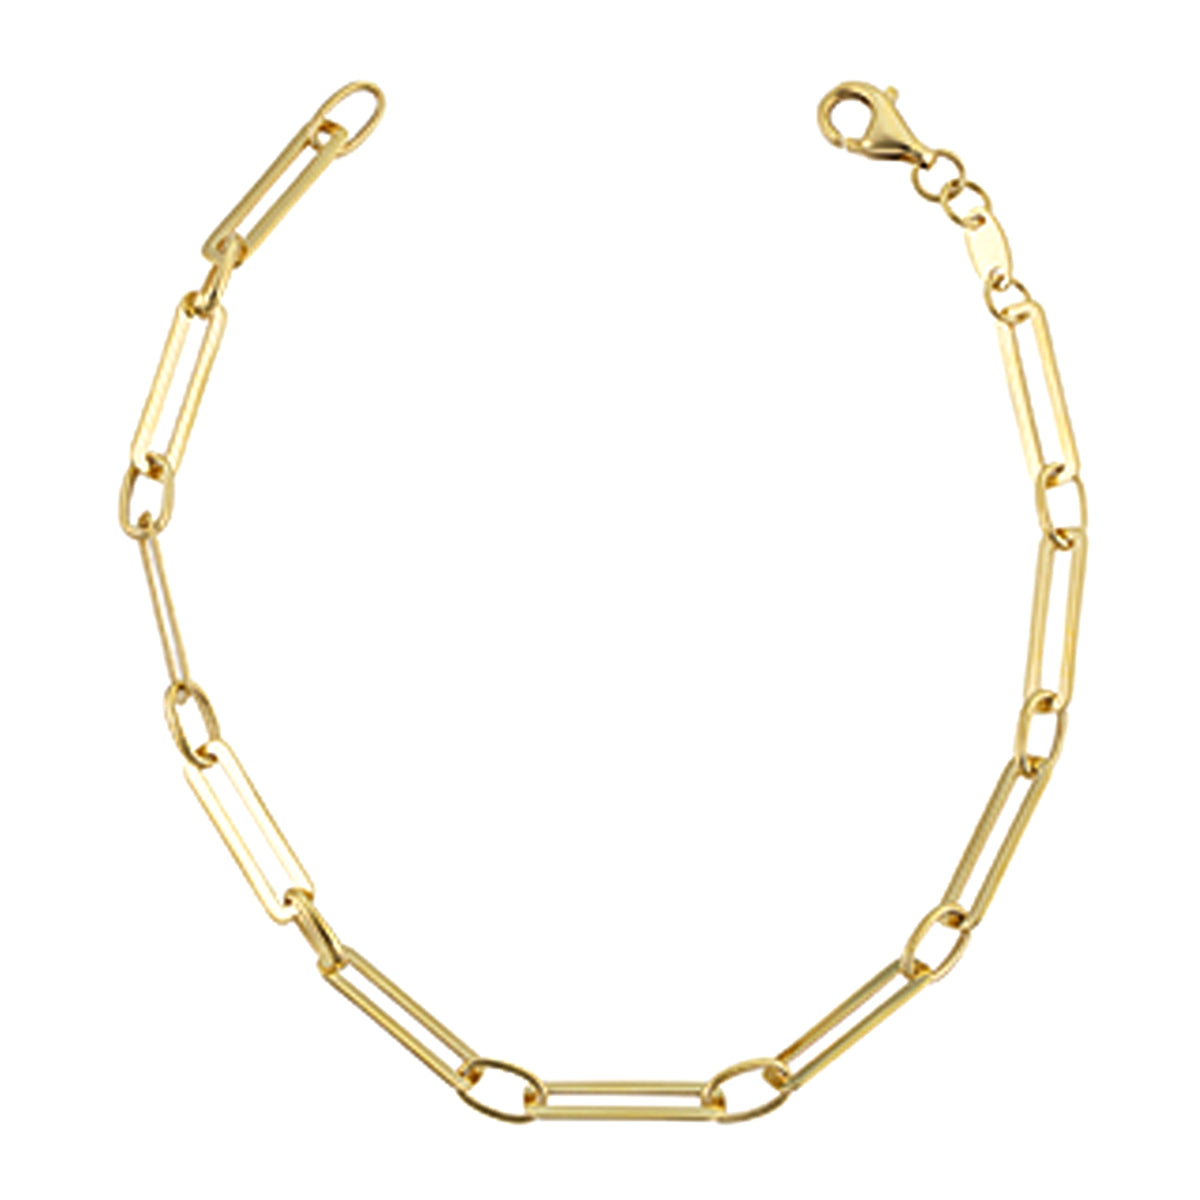 14k Yellow Gold Paperclip Chain Bracelet, 7.5" fine designer jewelry for men and women